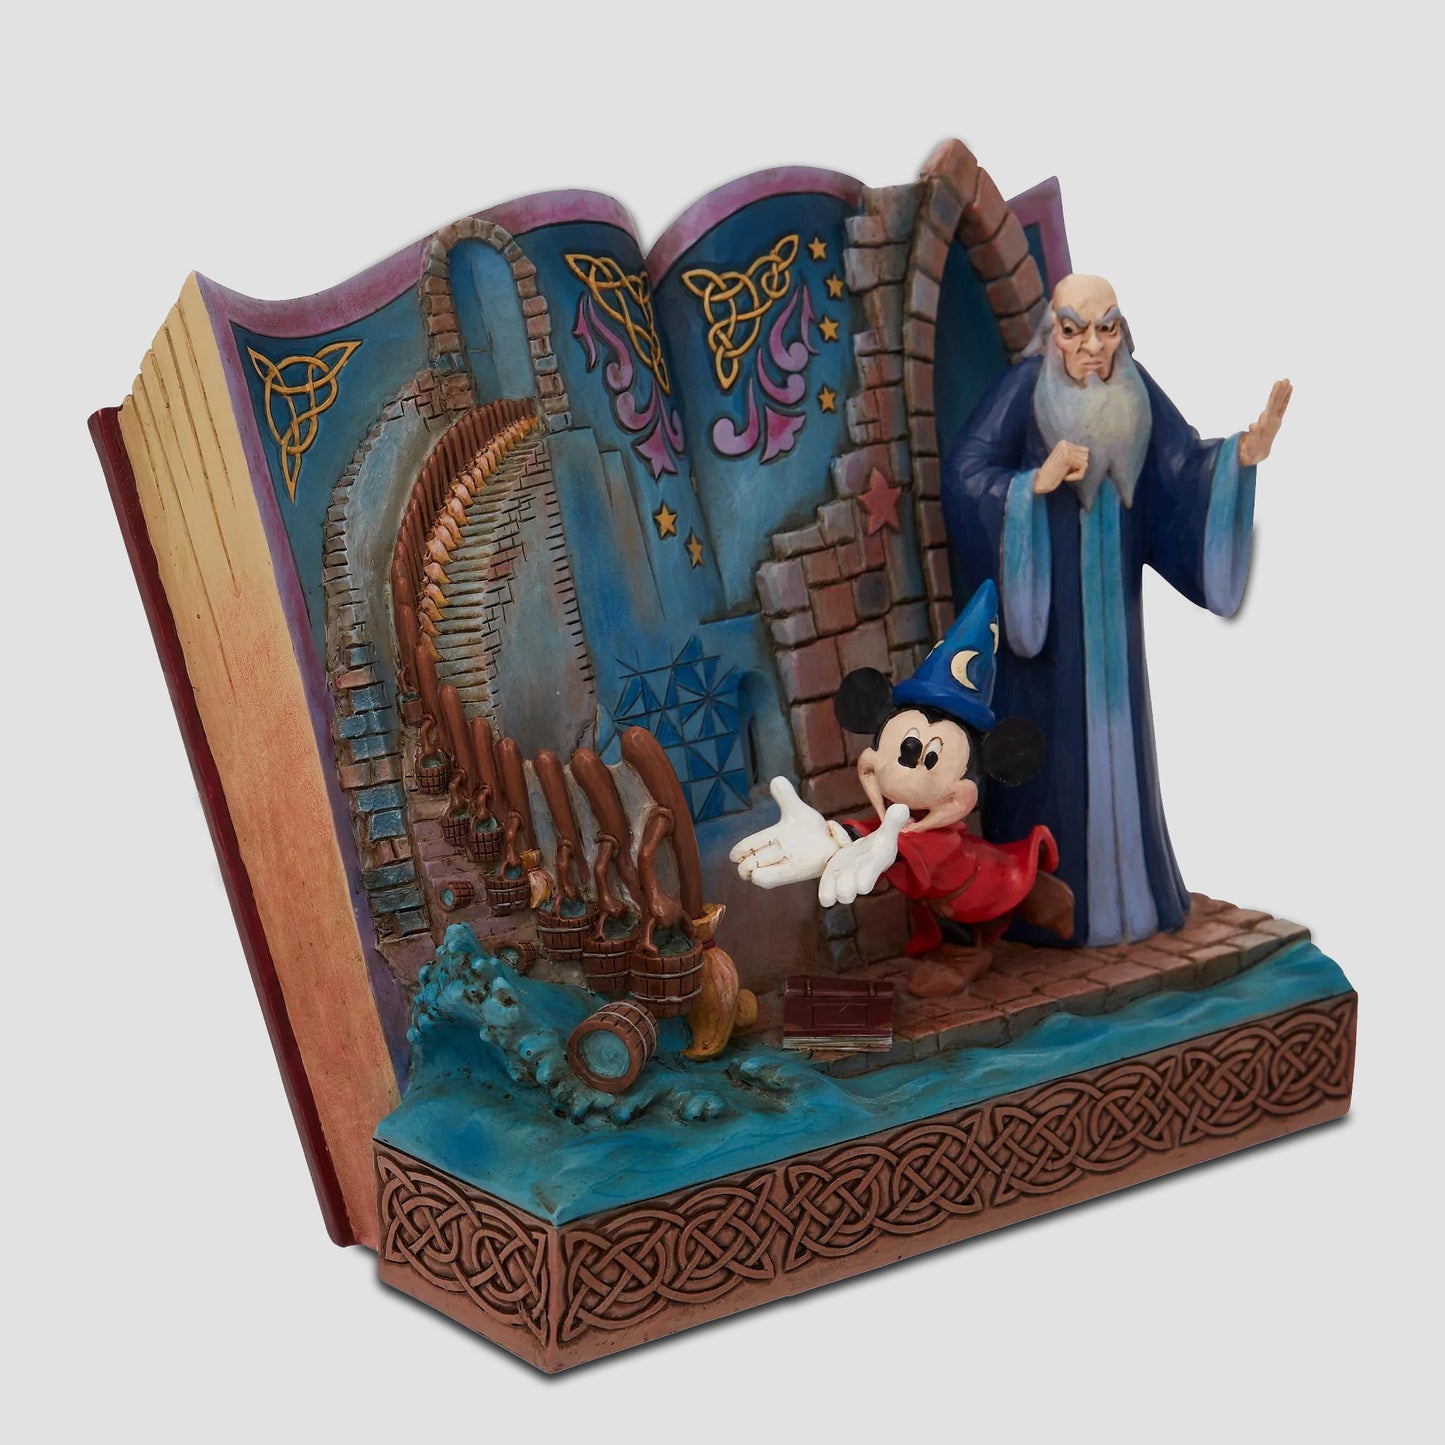 Sorcerer Mickey "A Lesson Learned" Jim Shore Disney Traditions Statue